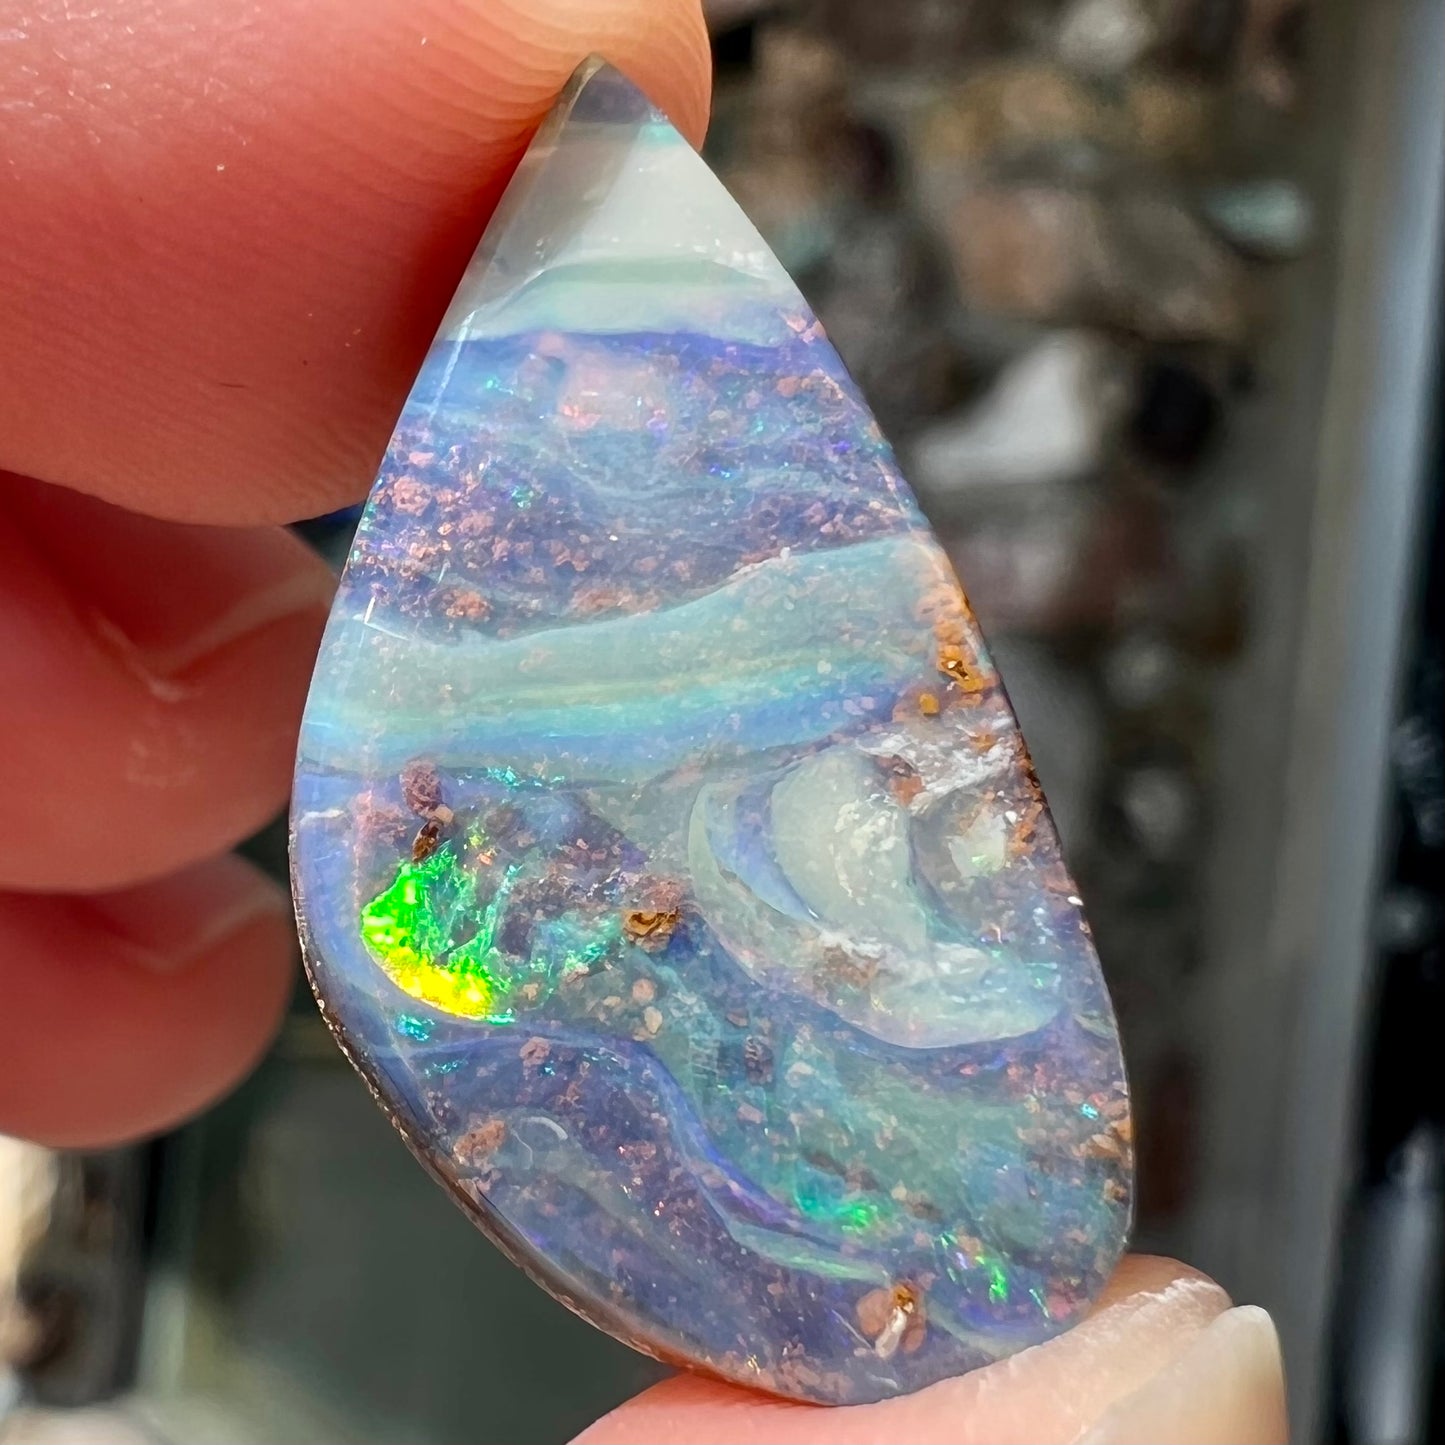 A loose Australian boulder opal stone from Quilpie, Australia.